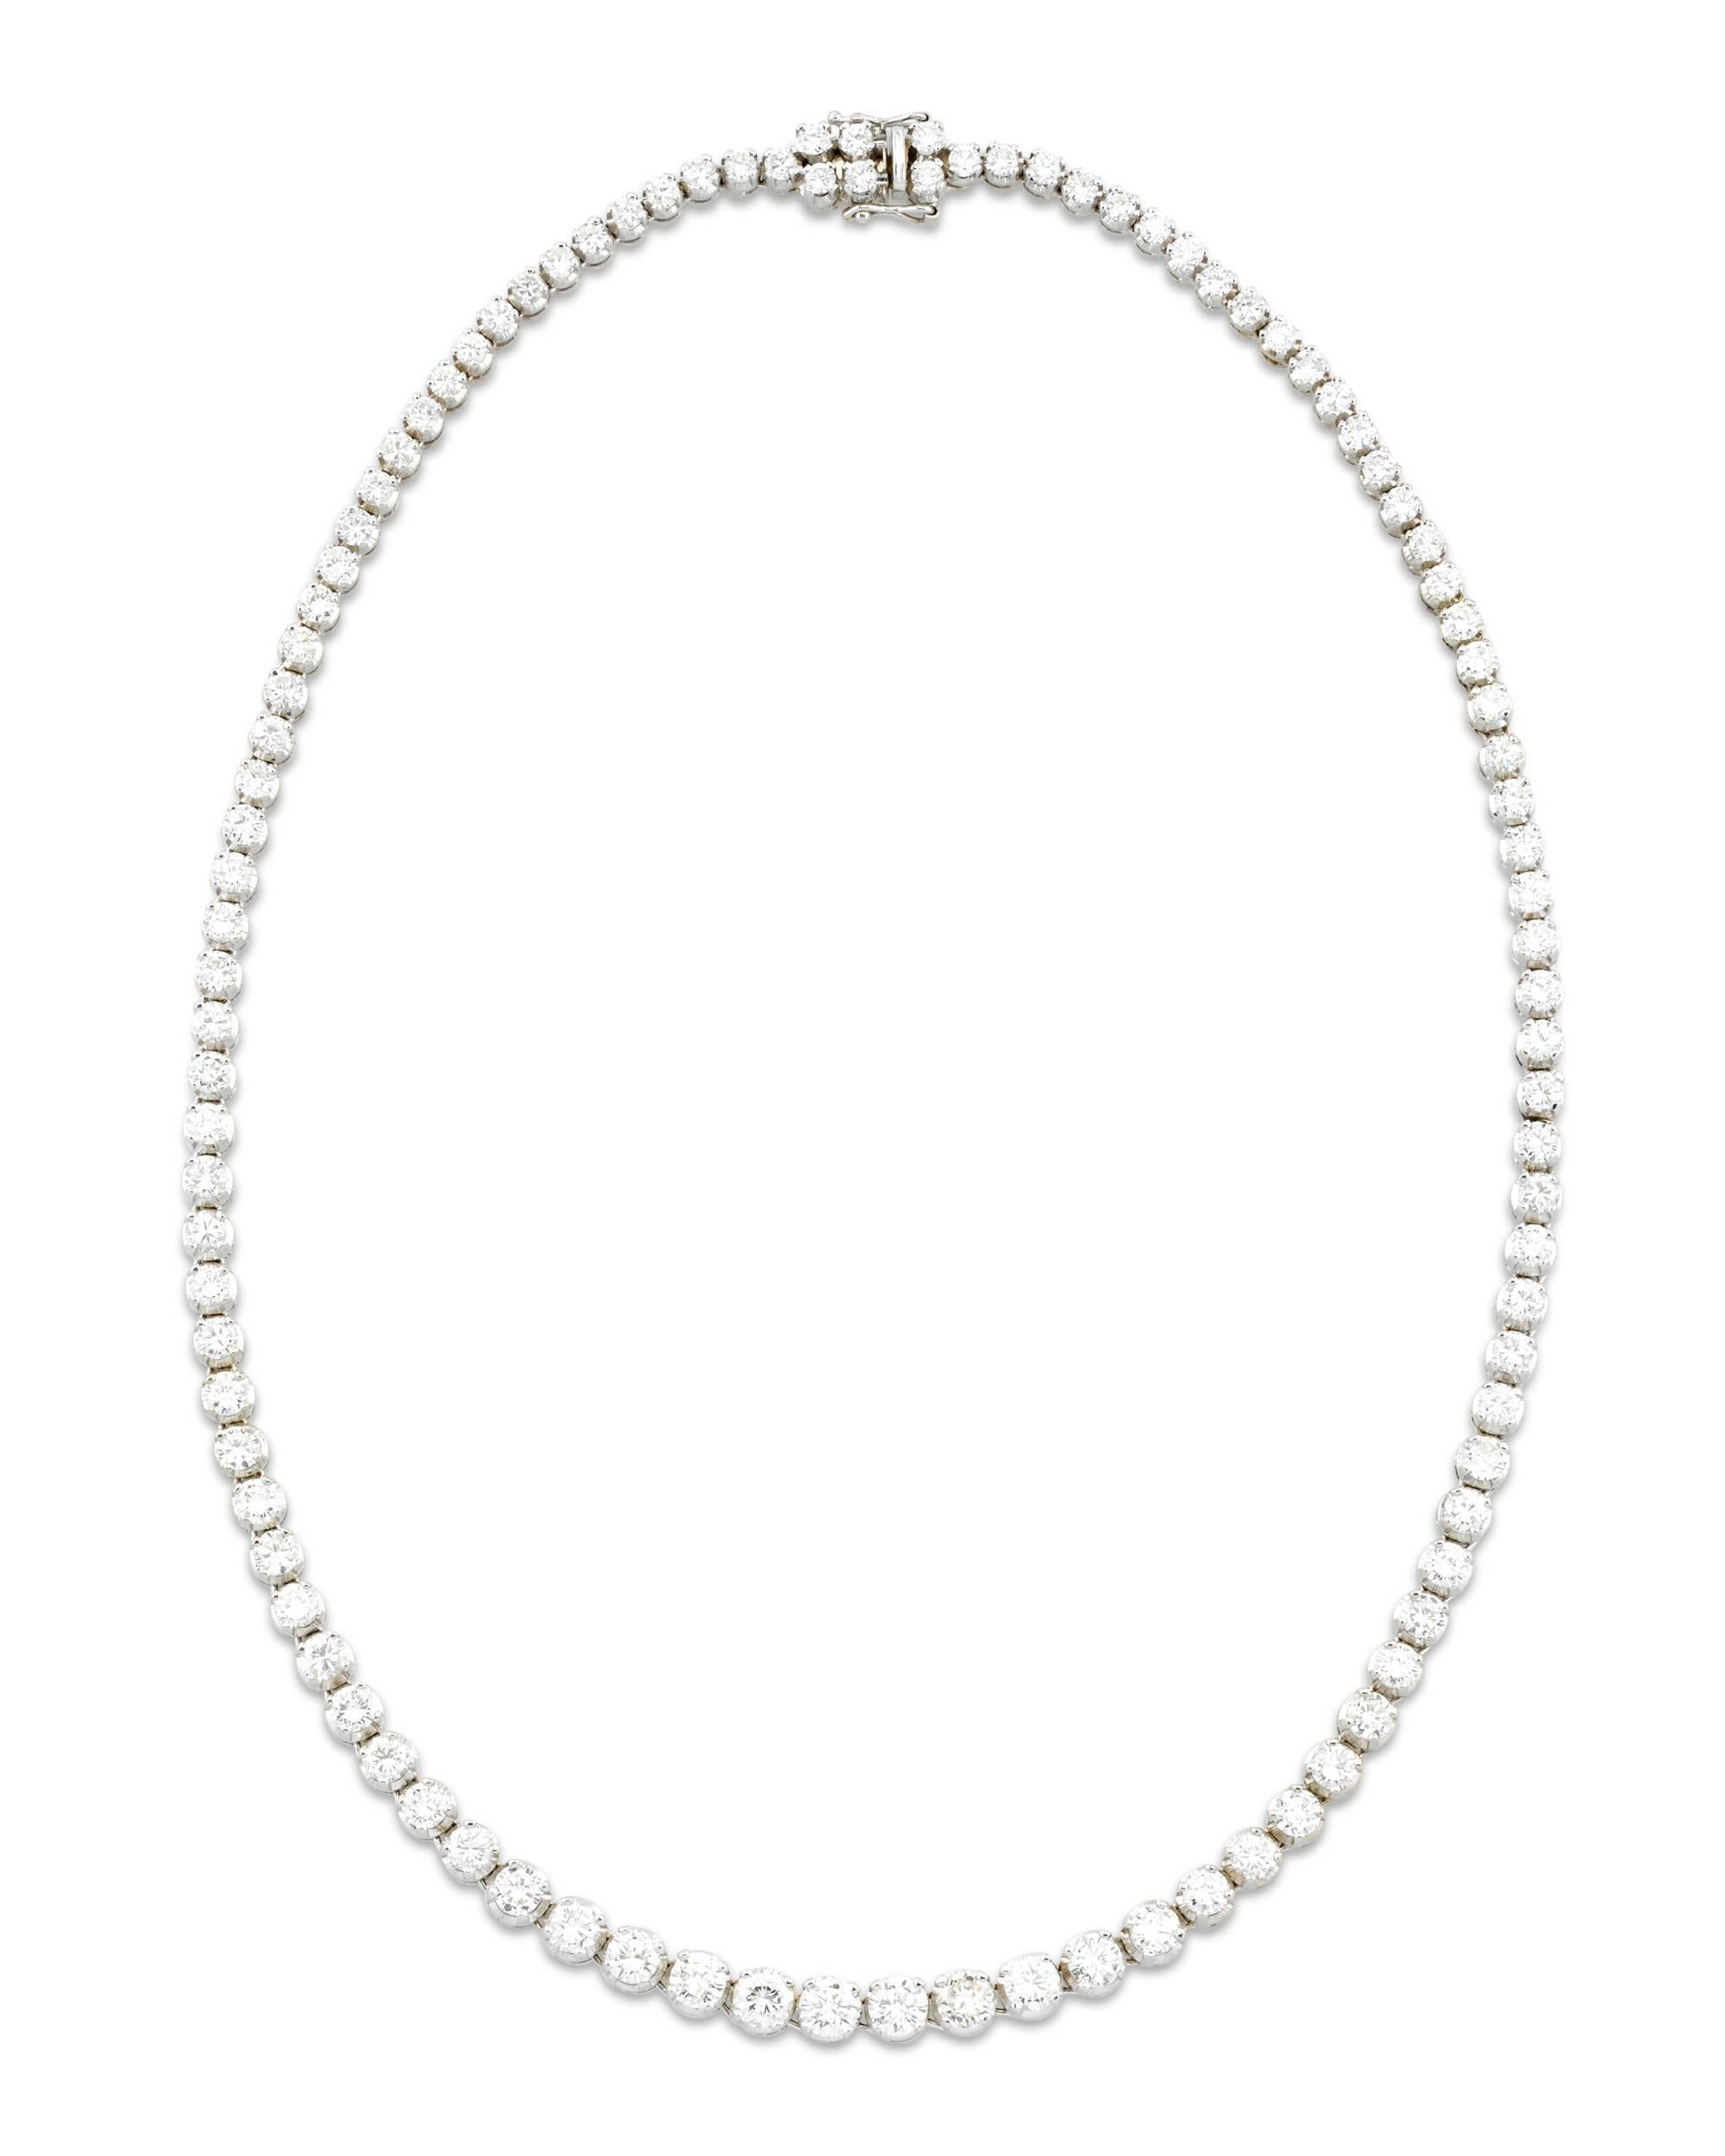 A true classic of diamond creations, this diamond Rivière necklace is absolutely extraordinary in both the exceptional quality of its gems and its sophisticated design. A river of shimmering diamonds totaling 16.50 carats comprise the dazzling